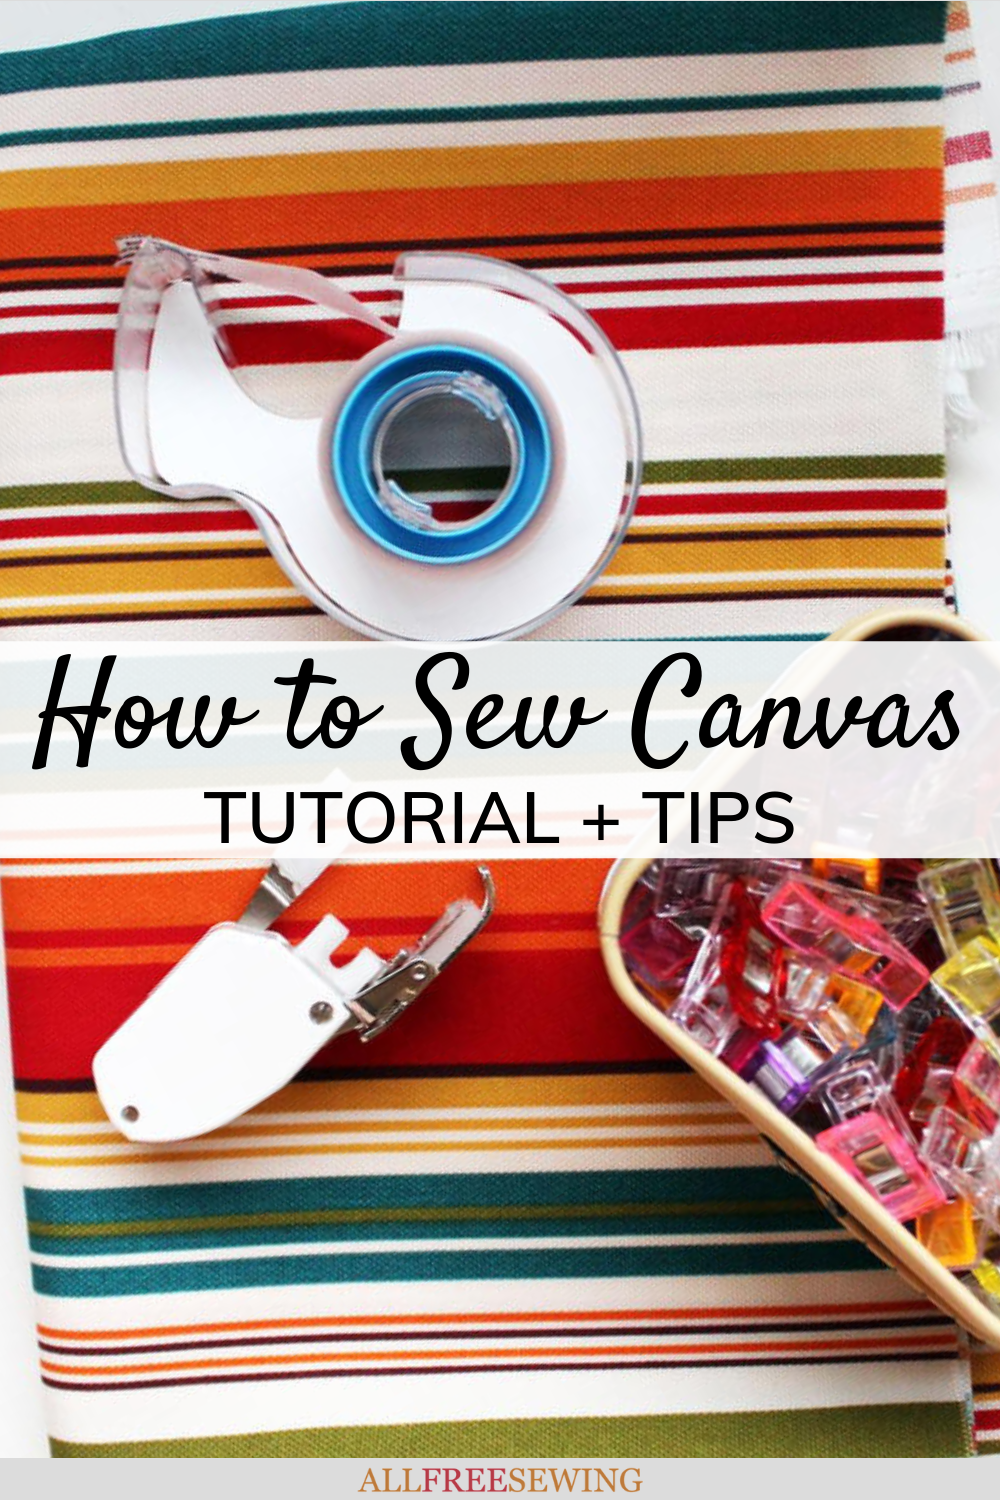 How to Sew Canvas (Tutorial and Tips)